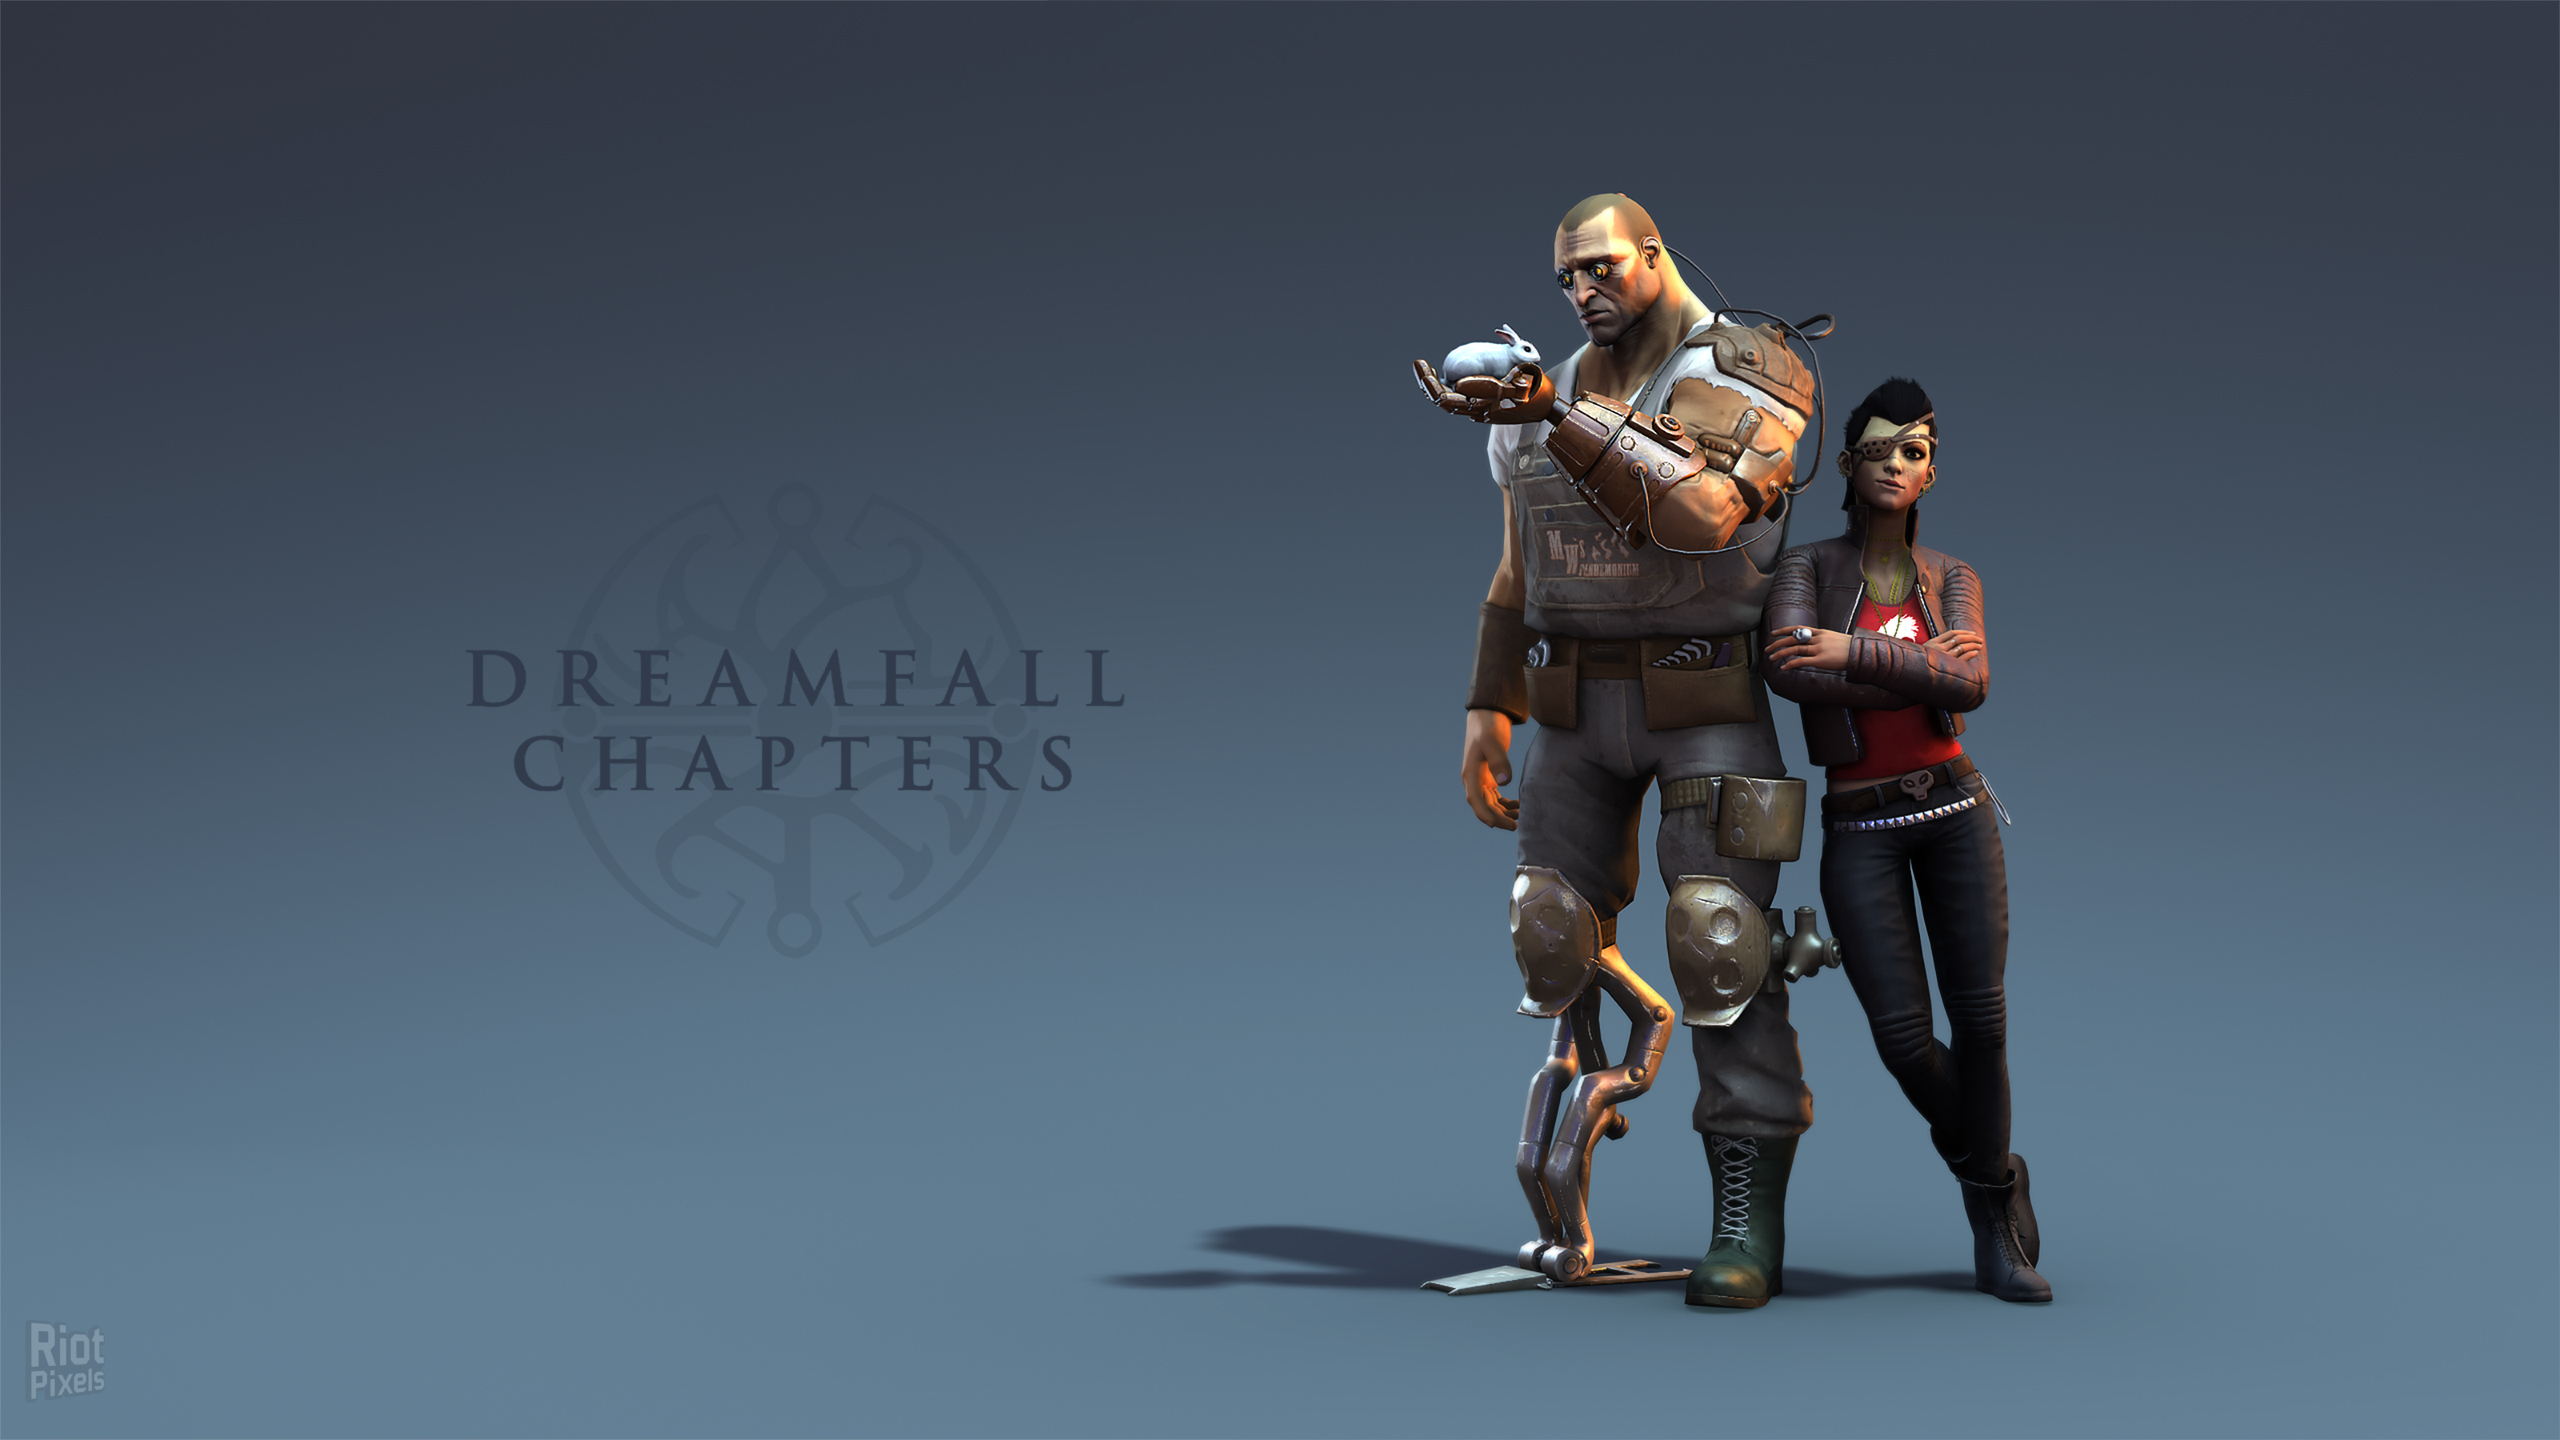 Dreamfall Chapters Game Wallpapers At Riot Pixels Images